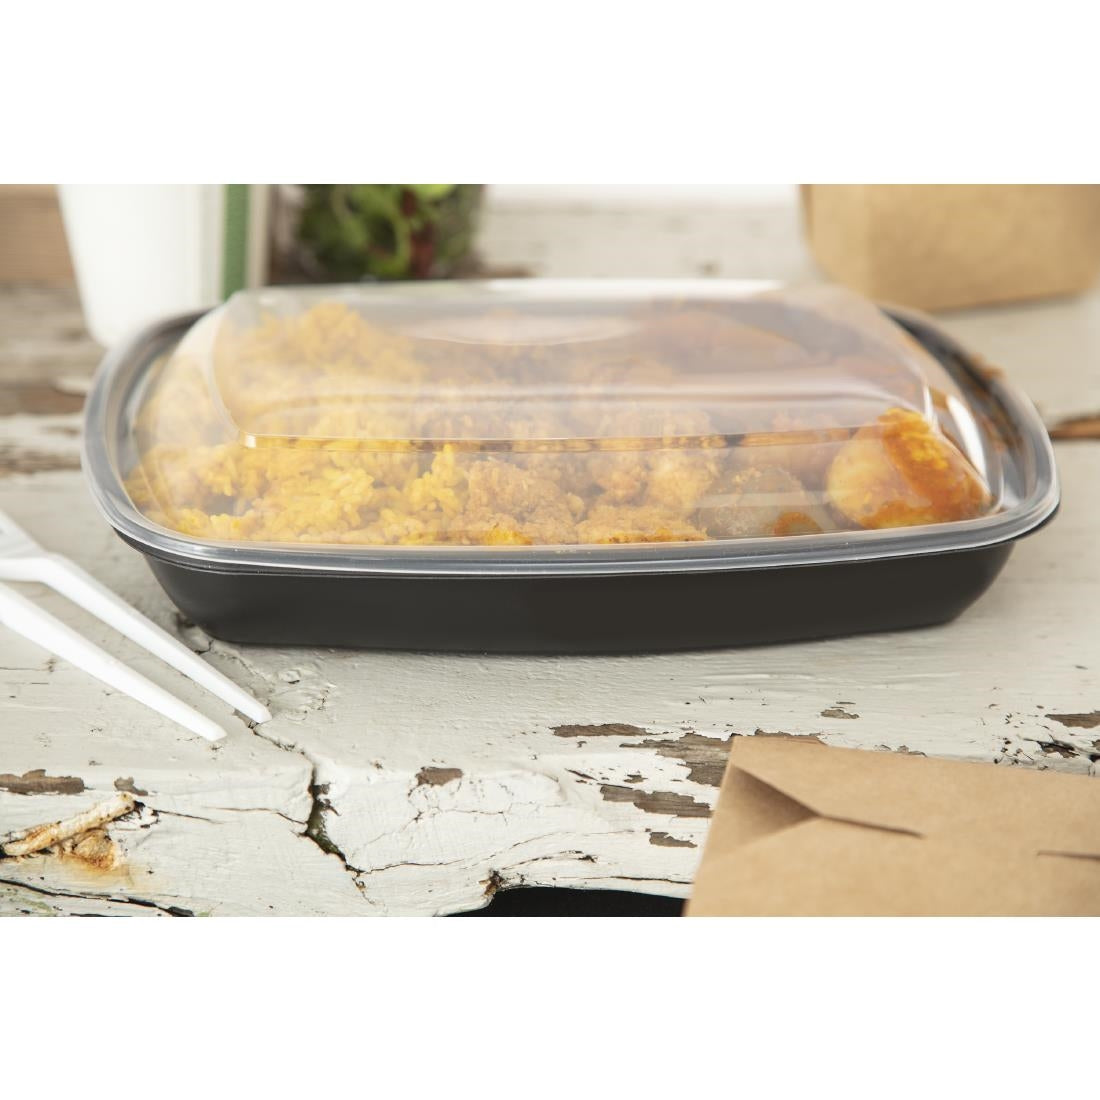 Fastpac Large Rectangular Food Containers 1350ml / 48oz (Pack of 150) JD Catering Equipment Solutions Ltd